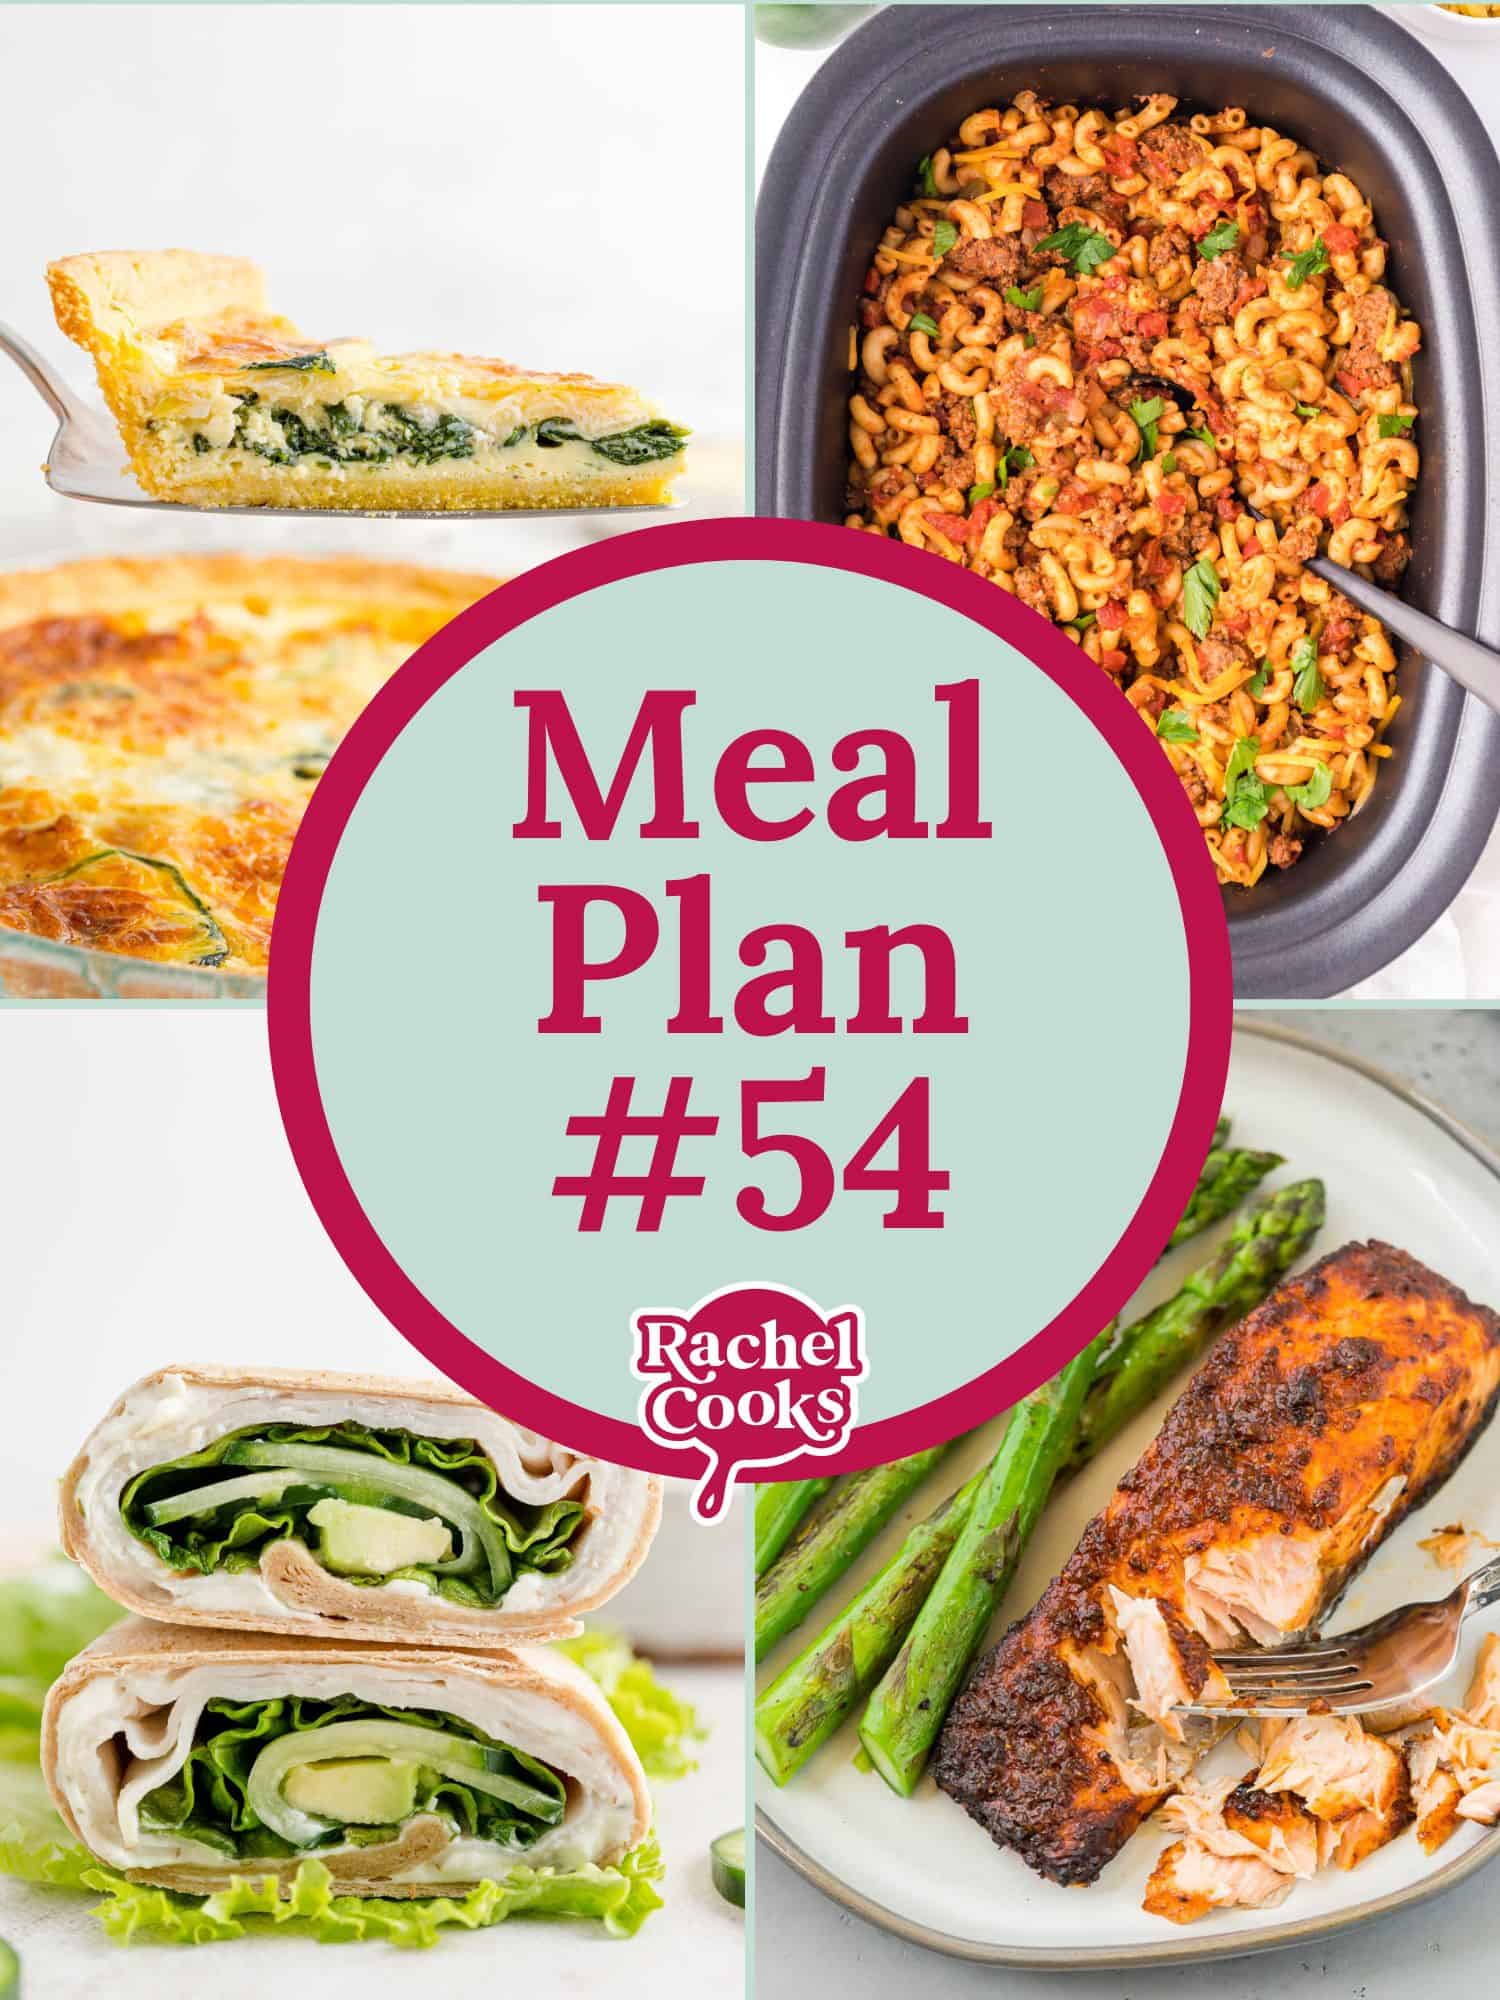 Meal plan 54 graphic with text and photos of recipes included.